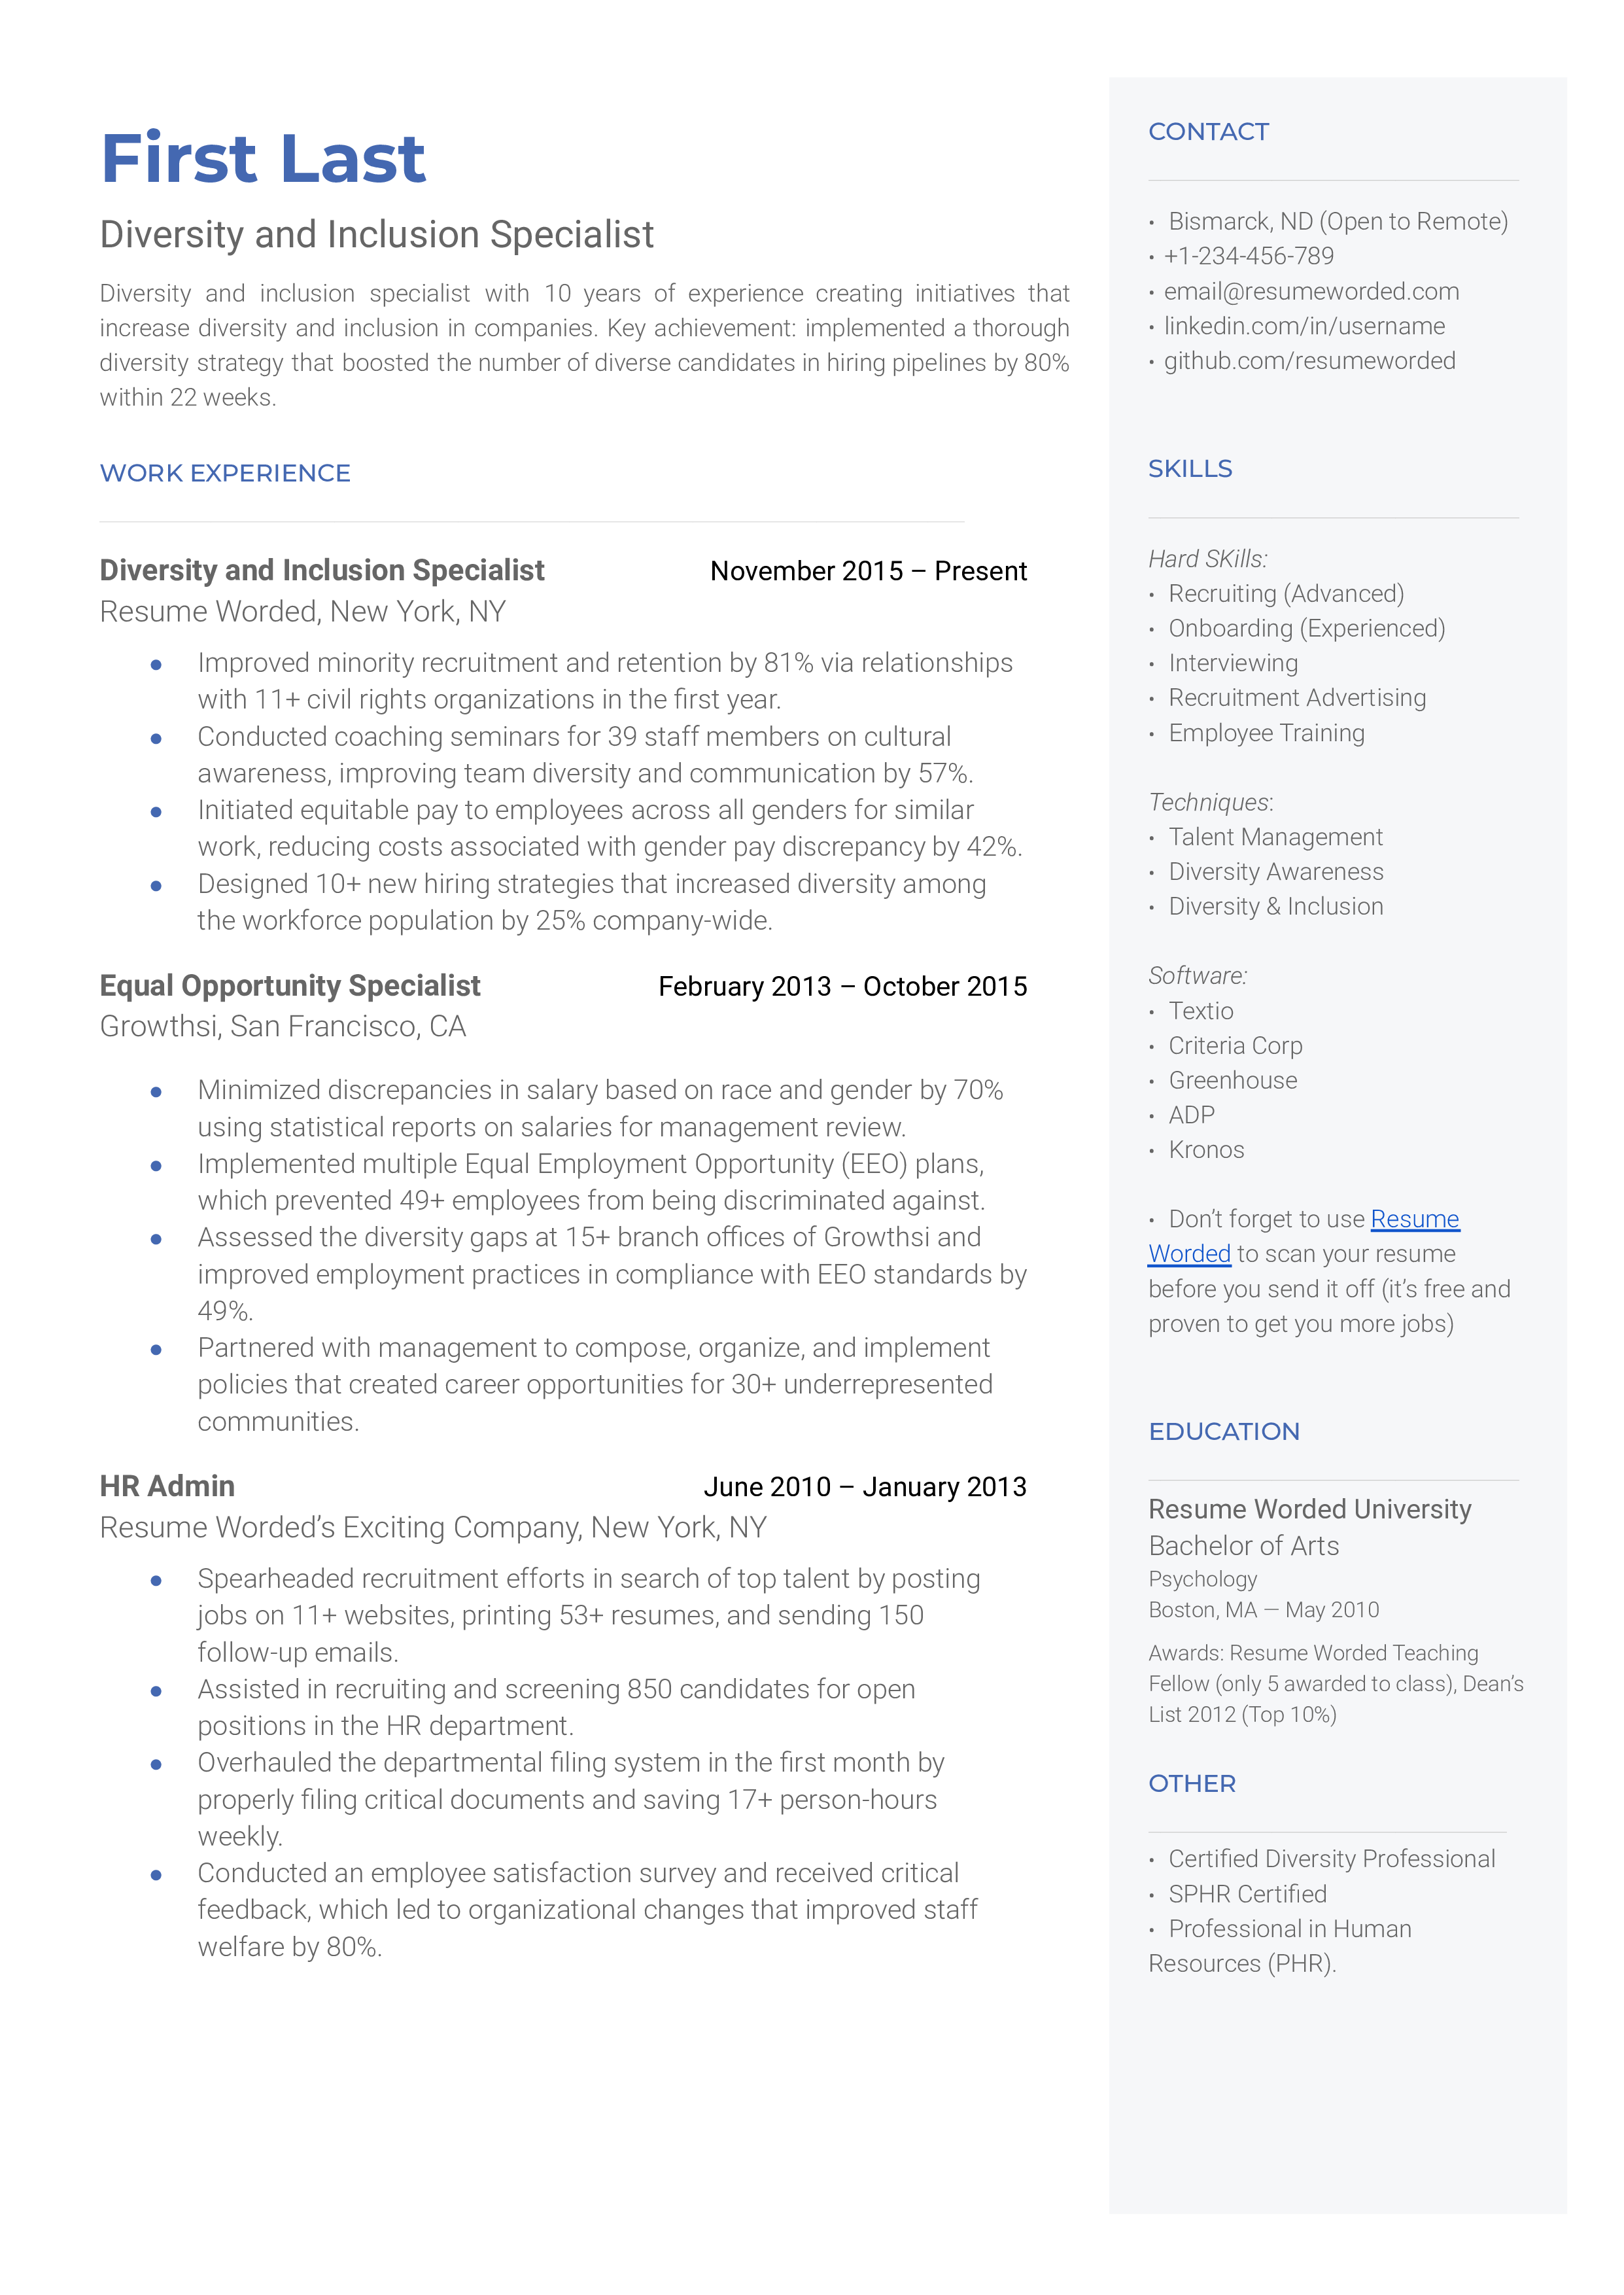 A CV screenshot for a Diversity and Inclusion Specialist role.